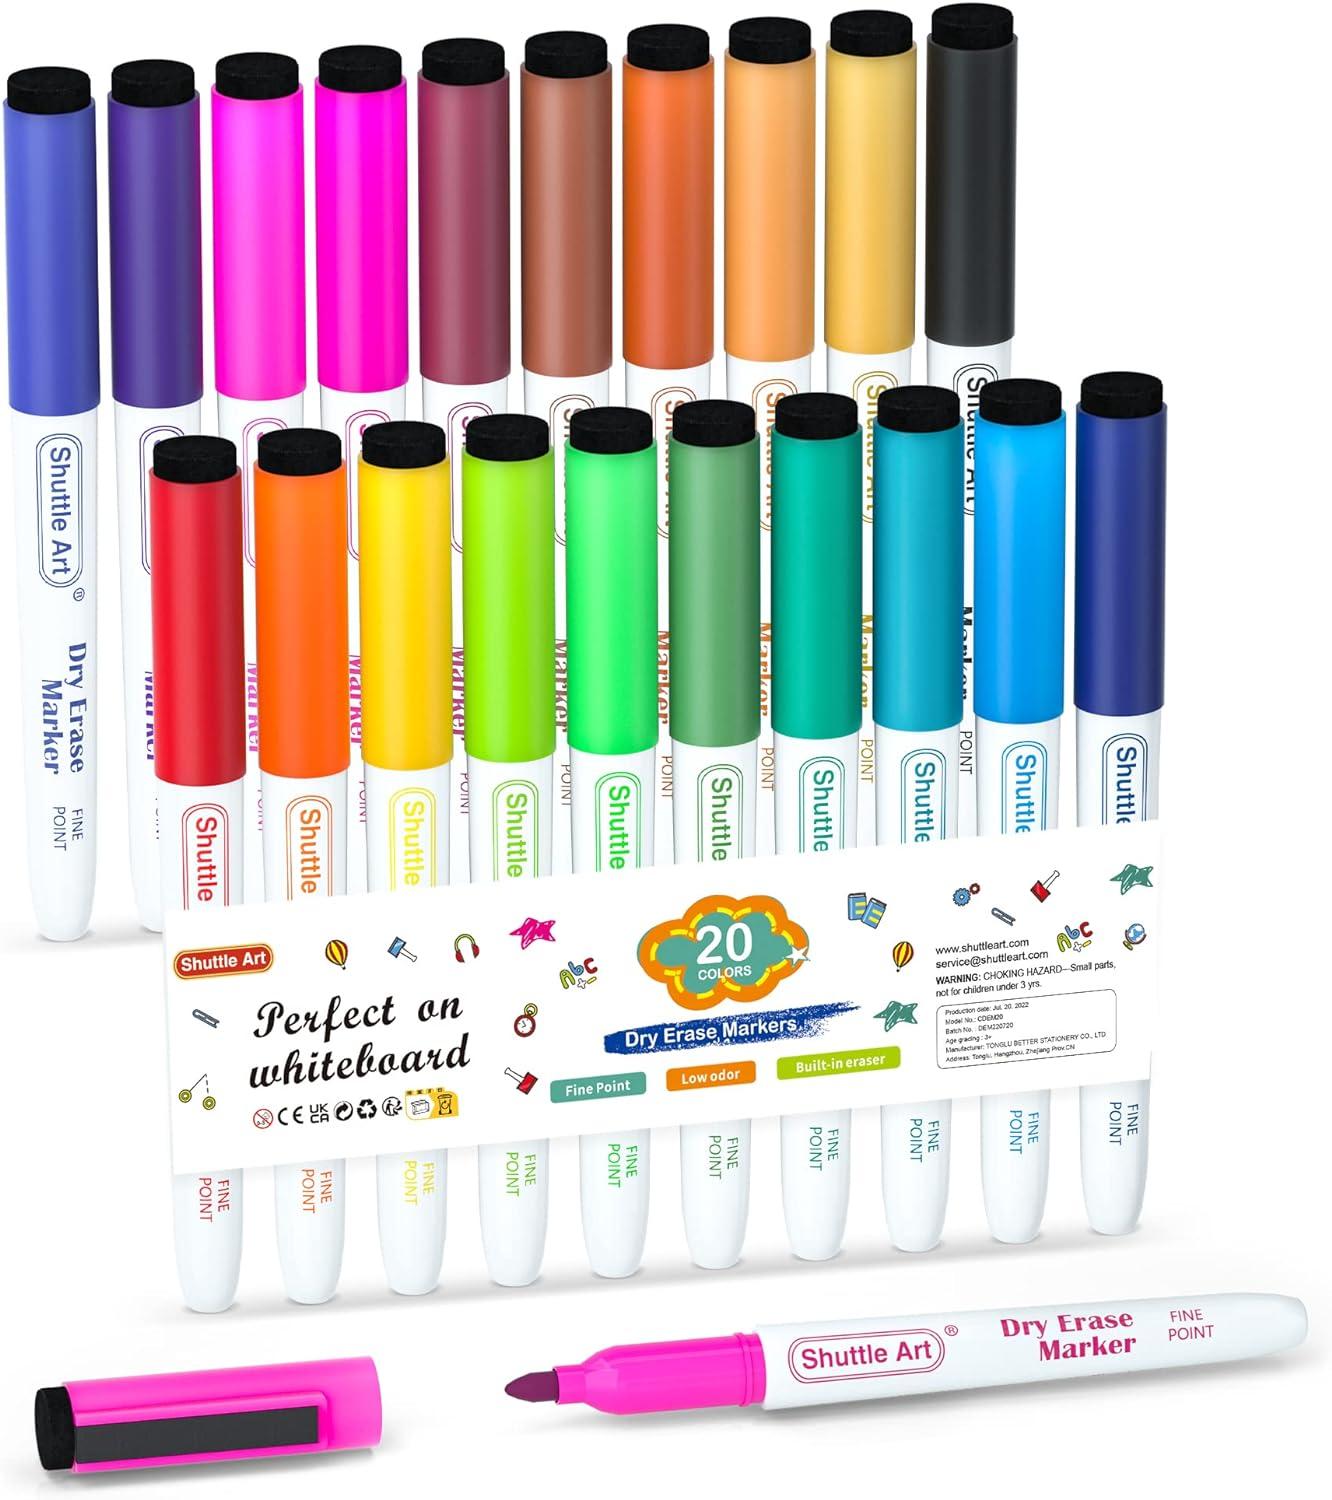 dry erase markers shuttle art 20 colors magnetic whiteboard markers with erase fine point  shuttle art